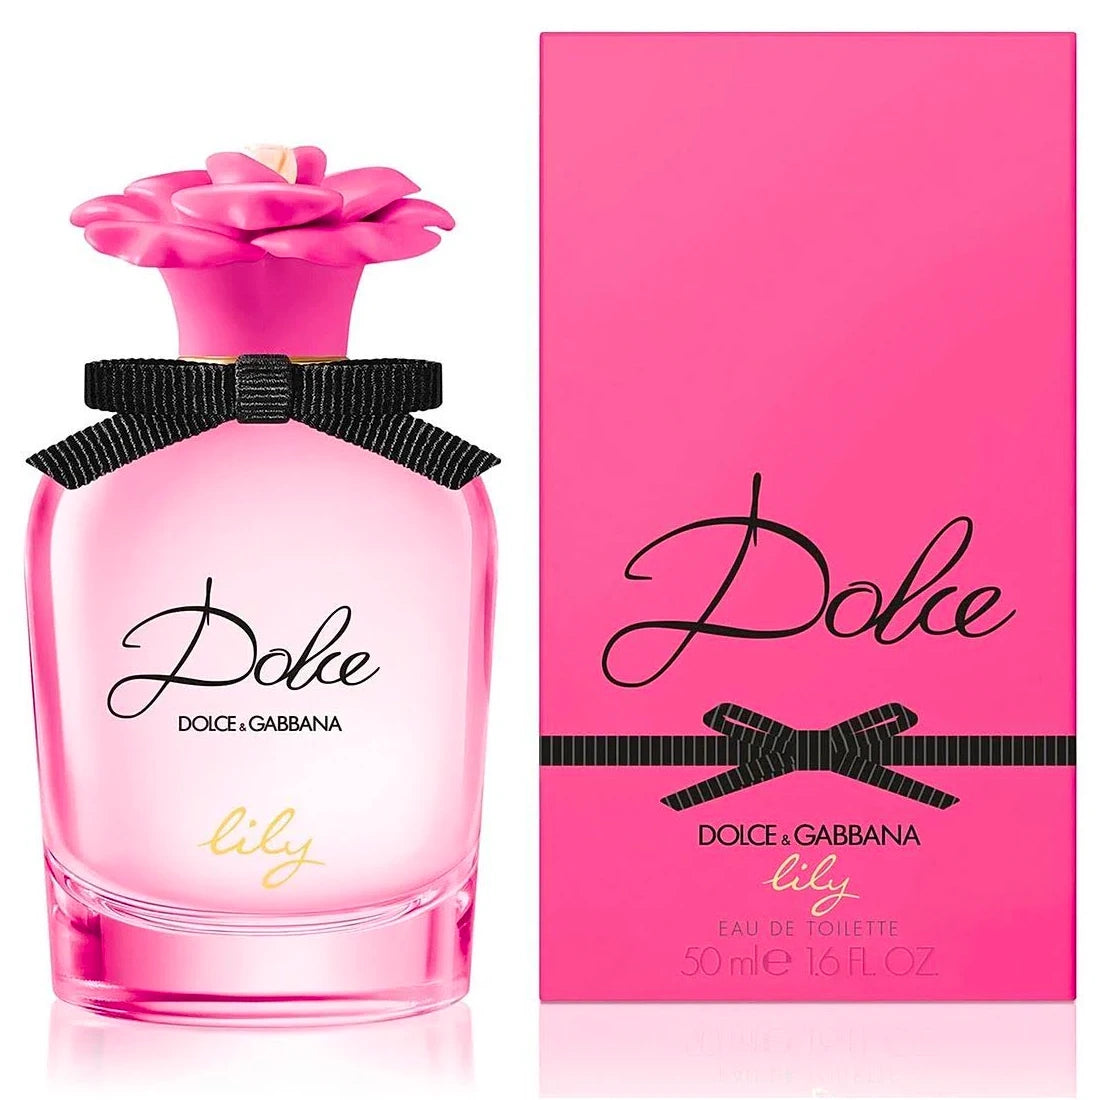 <span data-mce-fragment="1">Dolce Lily, the luminous Eau de Toilette in Dolce collection by Dolce&amp;Gabbana. Expressing the authentic and caring side of the Dolce girl, the sparkling fruity-floral fragrance embodies her evolution to a self-confident young woman.</span>